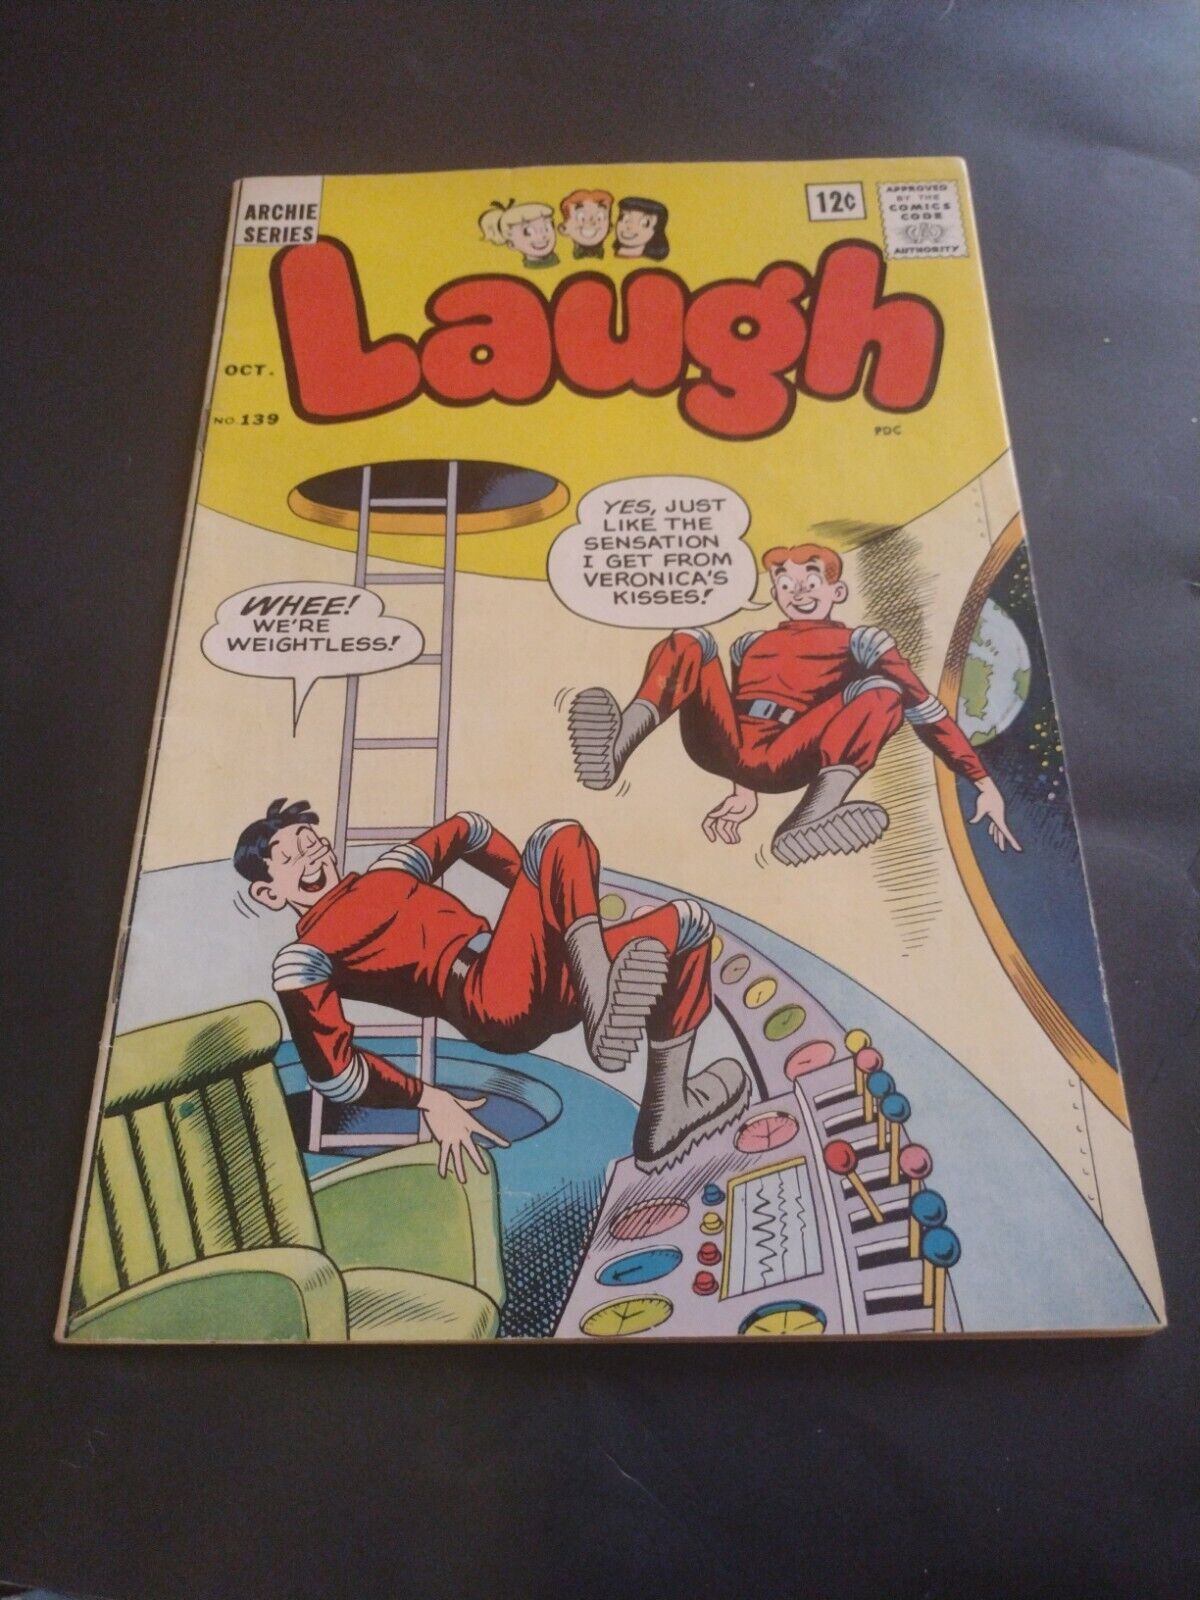 LAUGH COMICS #139 (1962) THE FLY, ARCHIE SPACE SHIP COVER JUGHEAD